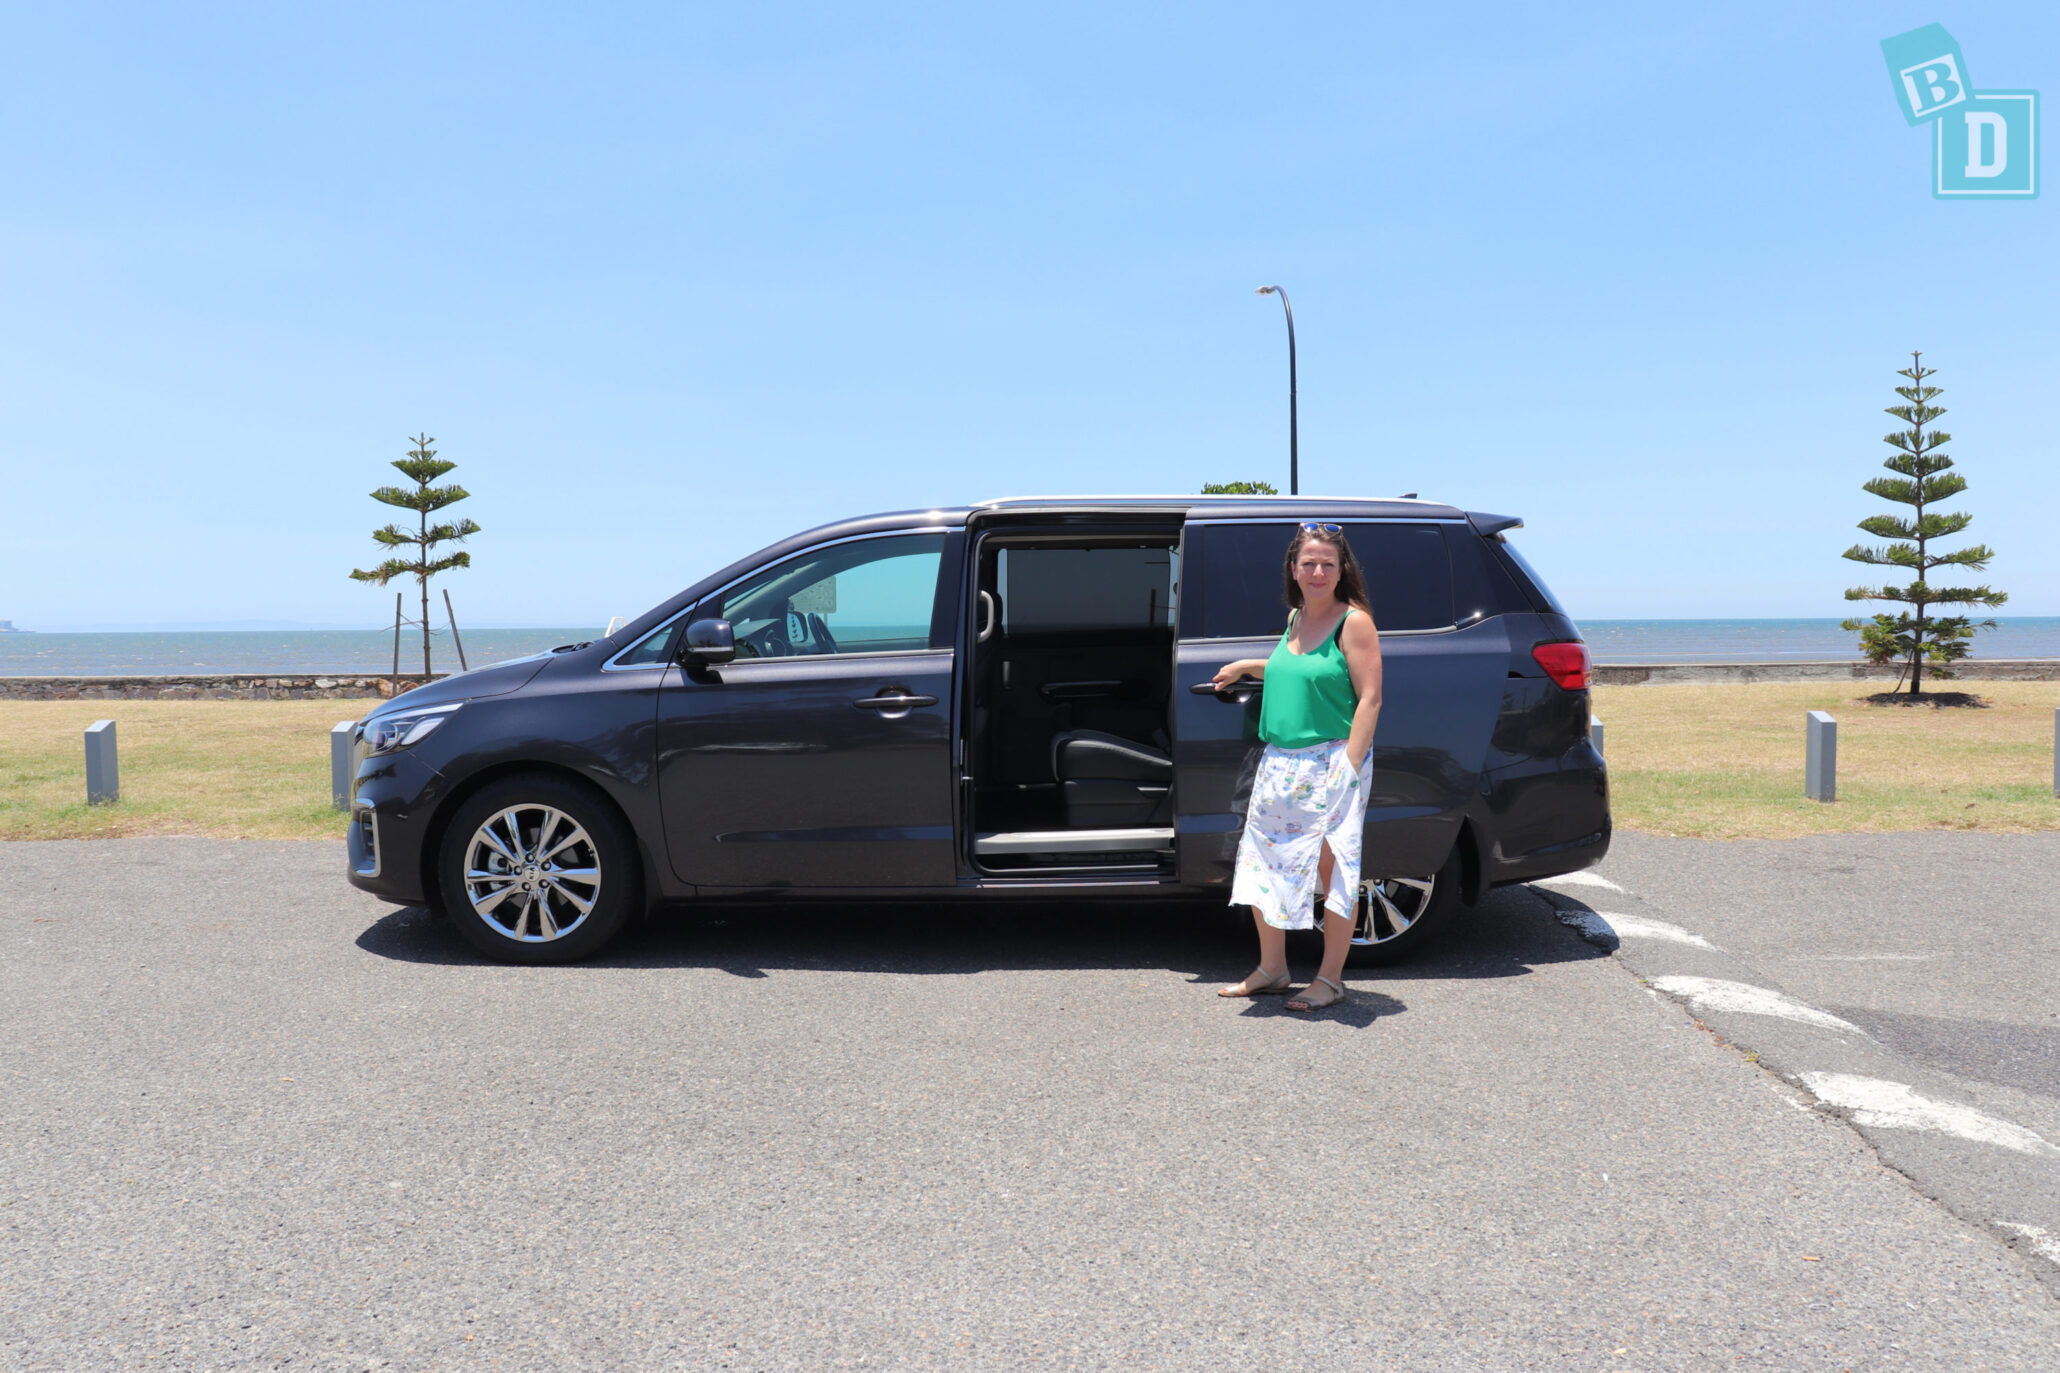 2019 Kia Carnival Review: Top 10 Family Features – BabyDrive